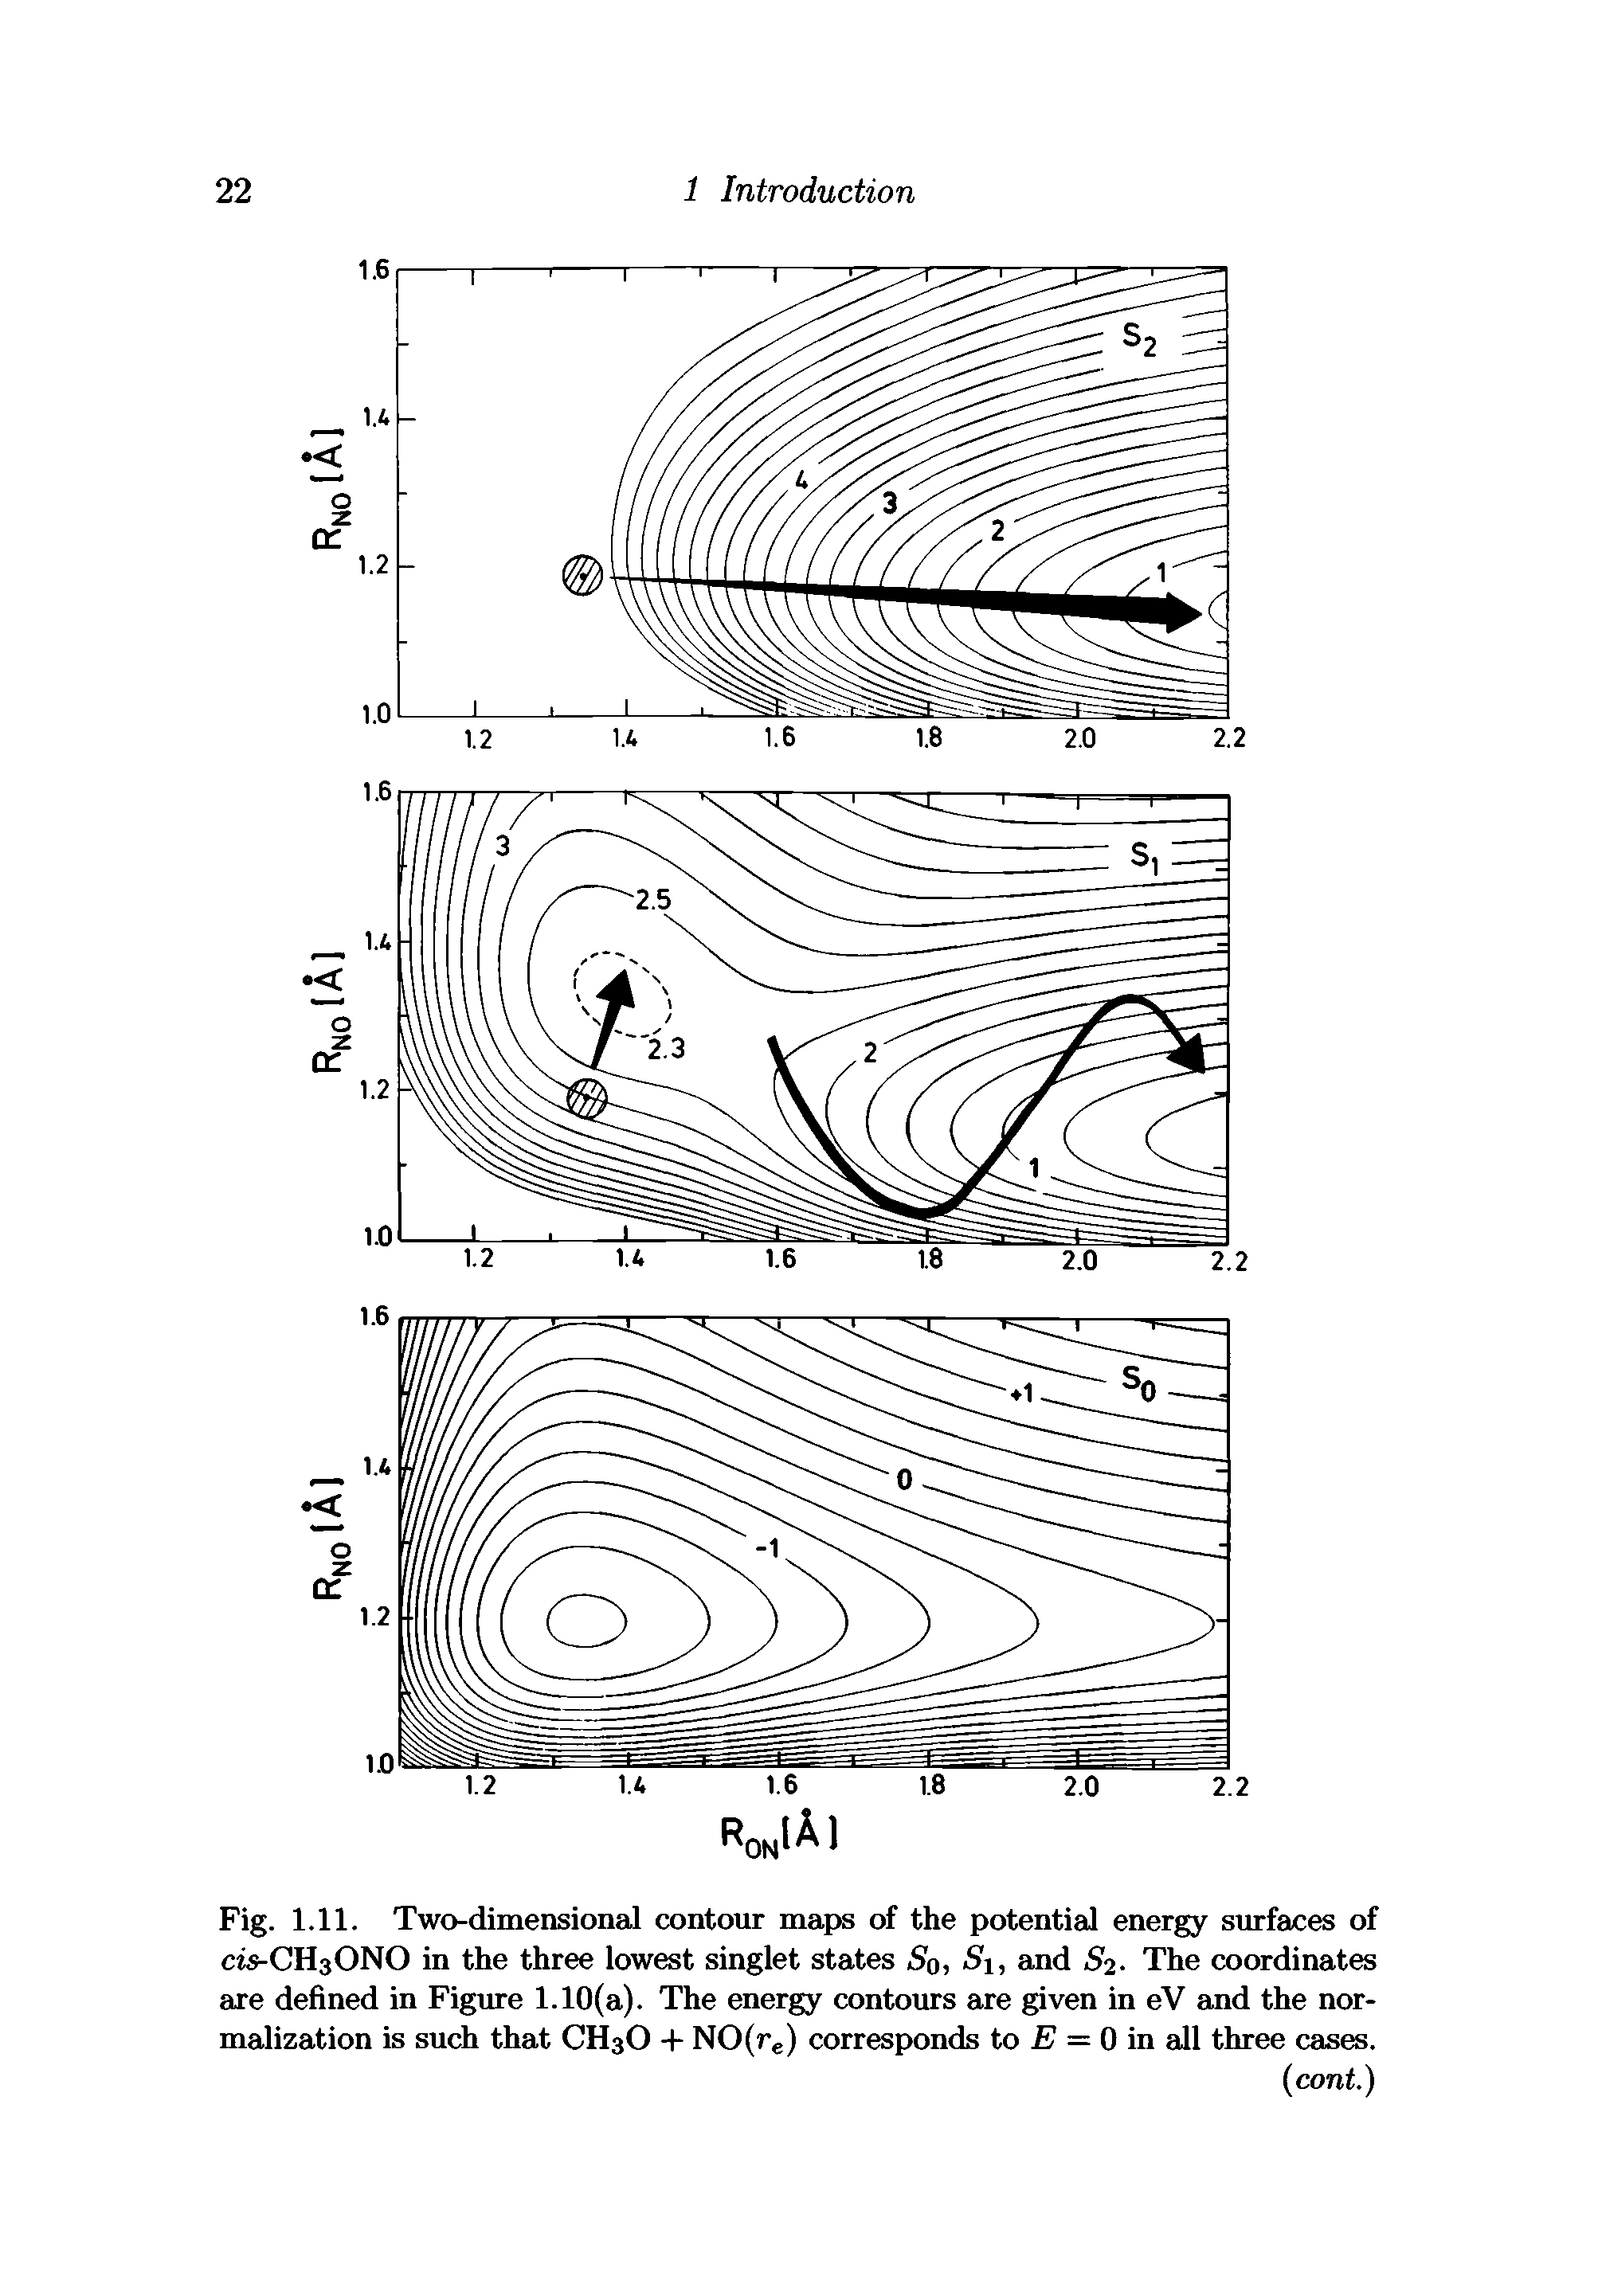 Fig. 1.11. Two-dimensional contour maps of the potential energy surfaces of cis-CHsONO in the three lowest singlet states So, Si, and 2- The coordinates are defined in Figure 1.10(a). The energy contours are given in eV and the normalization is such that CH3O + NO(re) corresponds to E = 0 in all three cases.